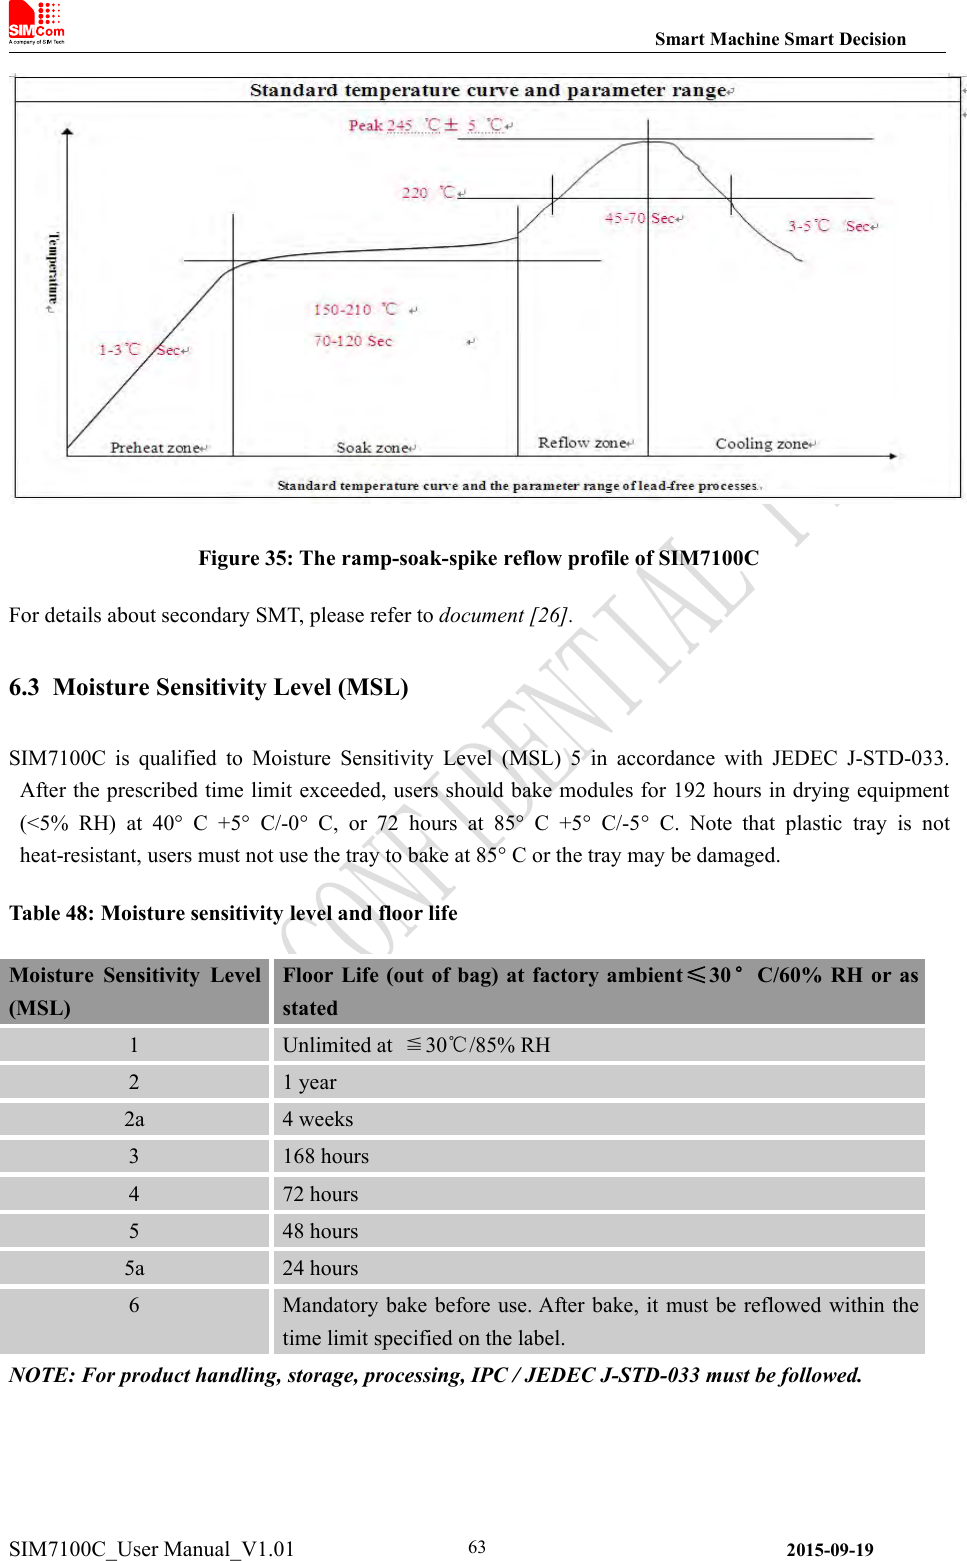 Smart Machine Smart DecisionSIM7100C_User Manual_V1.01 2015-09-1963Figure 35: The ramp-soak-spike reflow profile of SIM7100CFor details about secondary SMT, please refer to document [26].6.3 Moisture Sensitivity Level (MSL)SIM7100C is qualified to Moisture Sensitivity Level (MSL) 5 in accordance with JEDEC J-STD-033.After the prescribed time limit exceeded, users should bake modules for 192 hours in drying equipment(&lt;5% RH) at 40° C +5° C/-0° C, or 72 hours at 85° C +5° C/-5° C. Note that plastic tray is notheat-resistant, users must not use the tray to bake at 85° C or the tray may be damaged.Table 48: Moisture sensitivity level and floor lifeMoisture Sensitivity Level(MSL)Floor Life (out of bag) at factory ambient≤30°C/60% RH or asstated1Unlimited at ≦30℃/85% RH21 year2a4 weeks3168 hours472 hours548 hours5a24 hours6Mandatory bake before use. After bake, it must be reflowed within thetime limit specified on the label.NOTE: For product handling, storage, processing, IPC / JEDEC J-STD-033 must be followed.